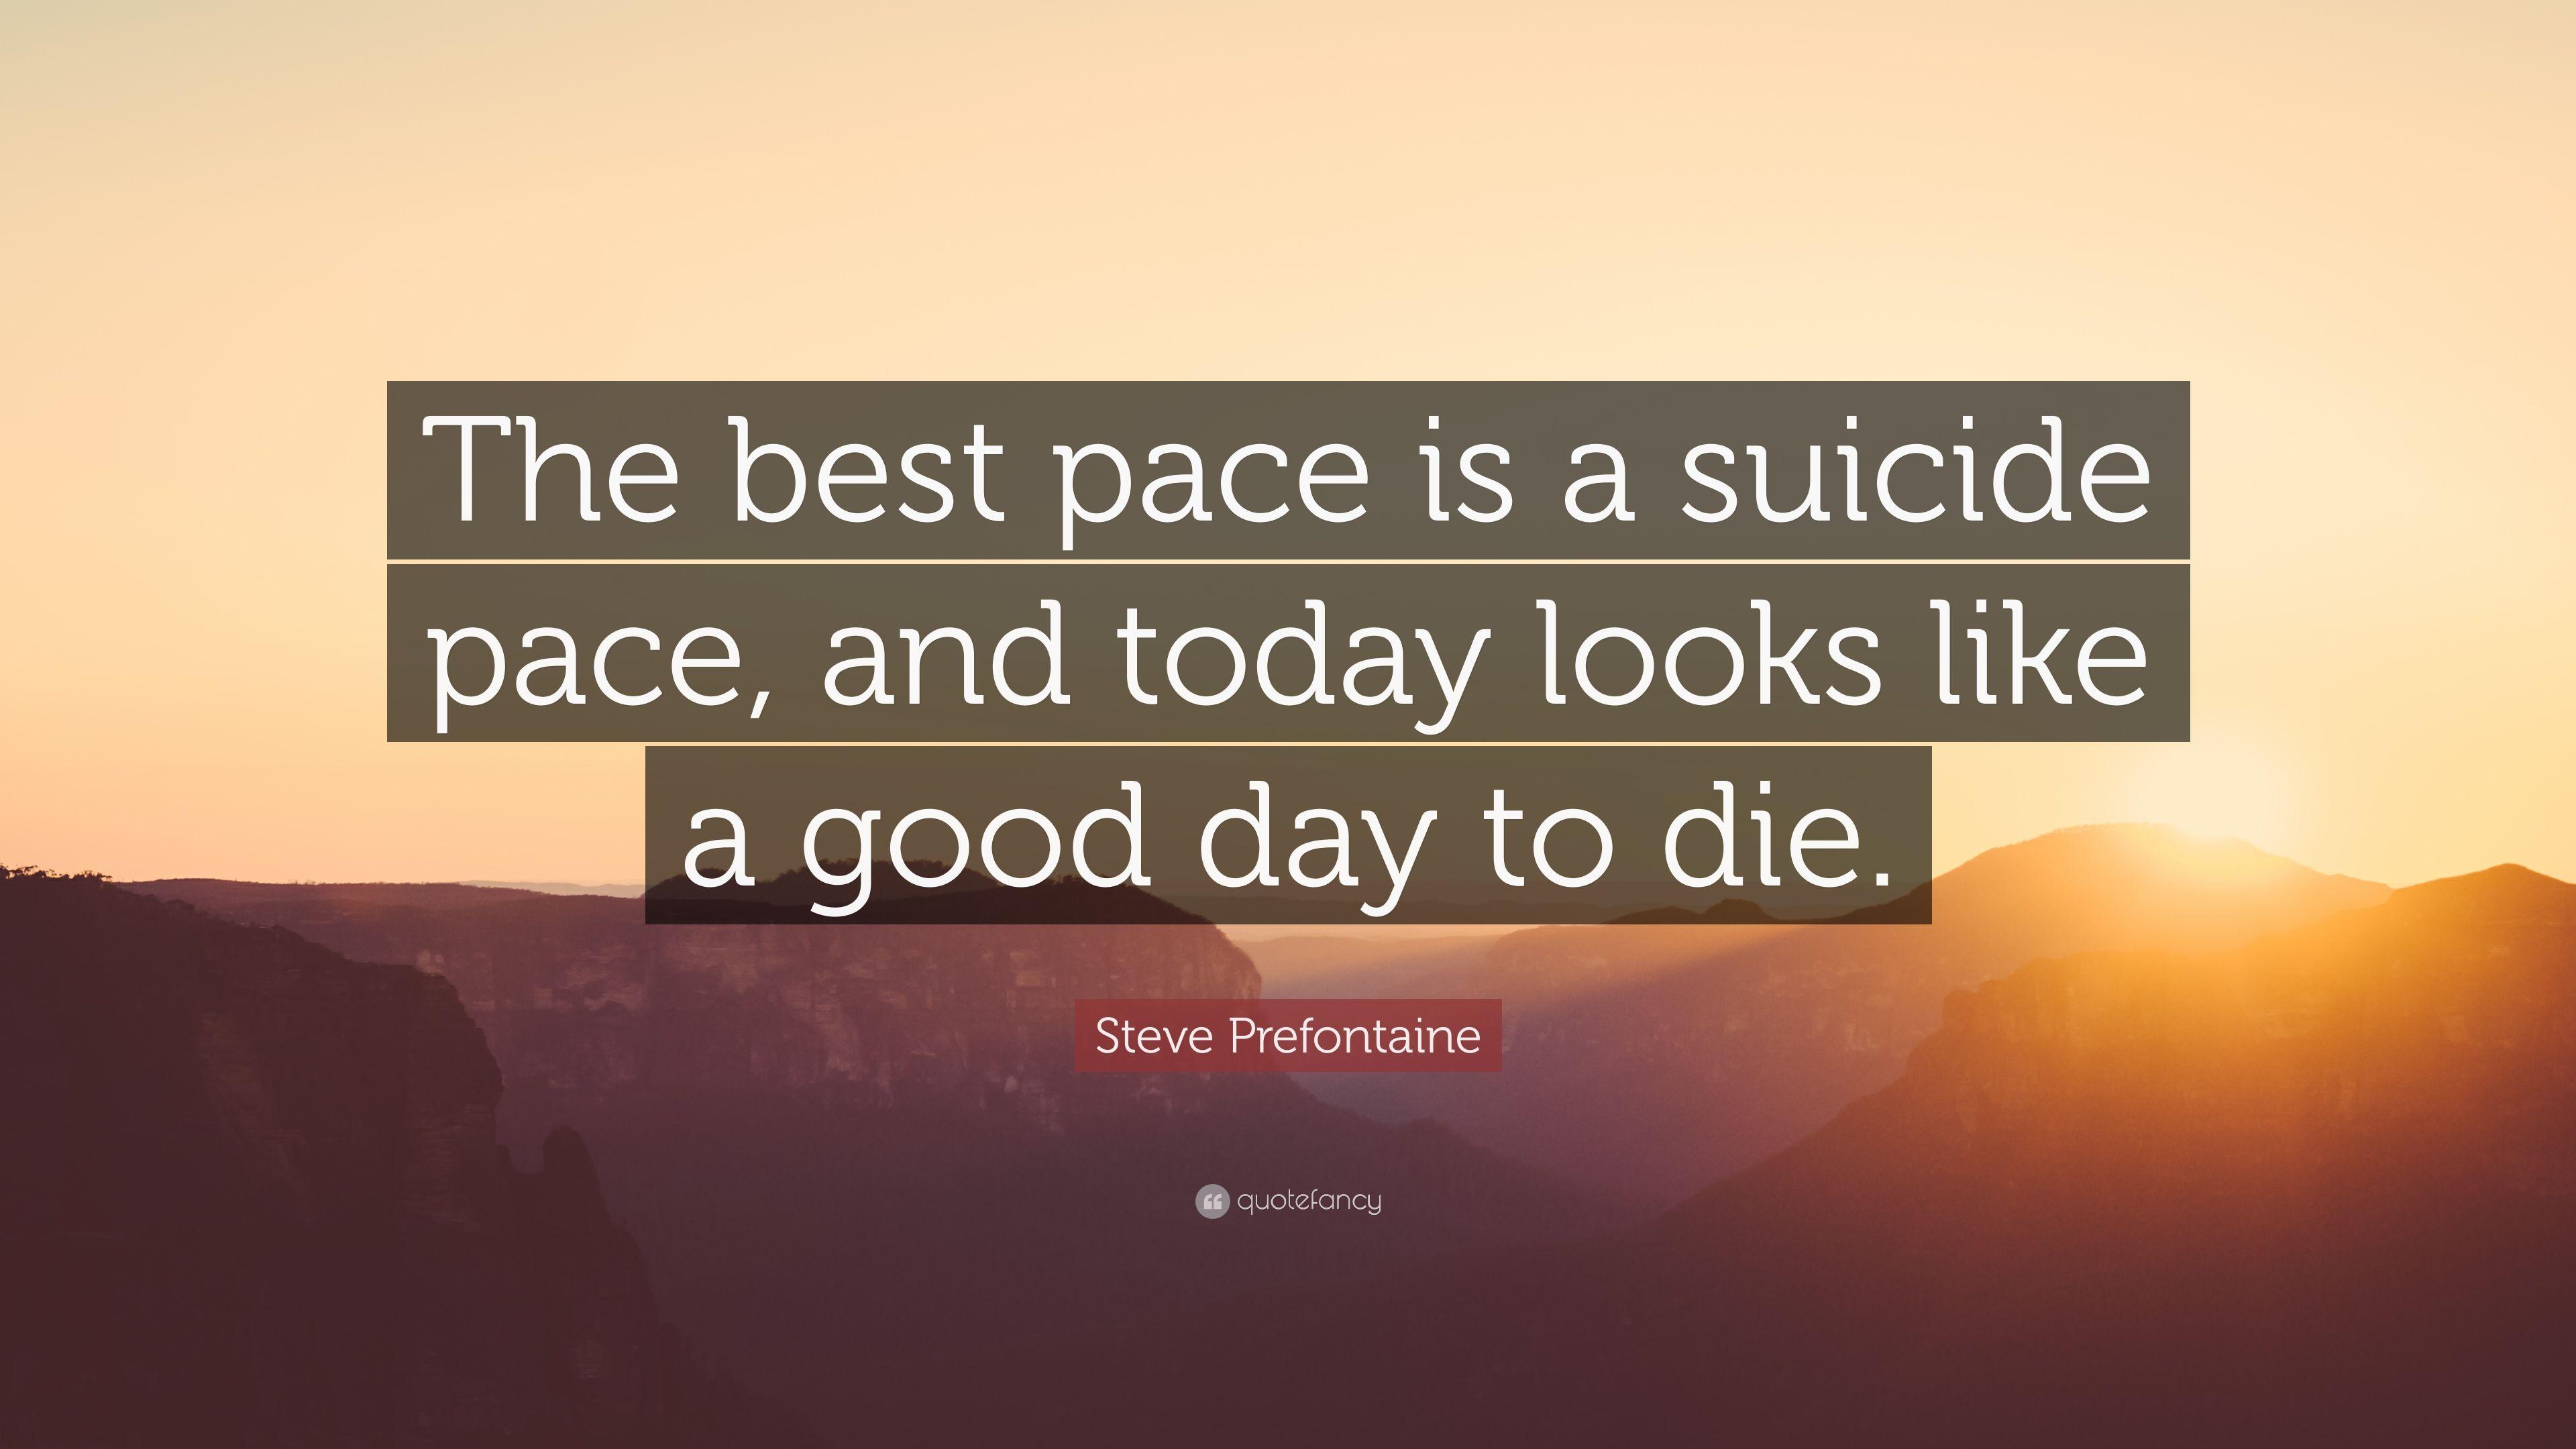 Steve Prefontaine Quote: “The best pace is a suicide pace, and today